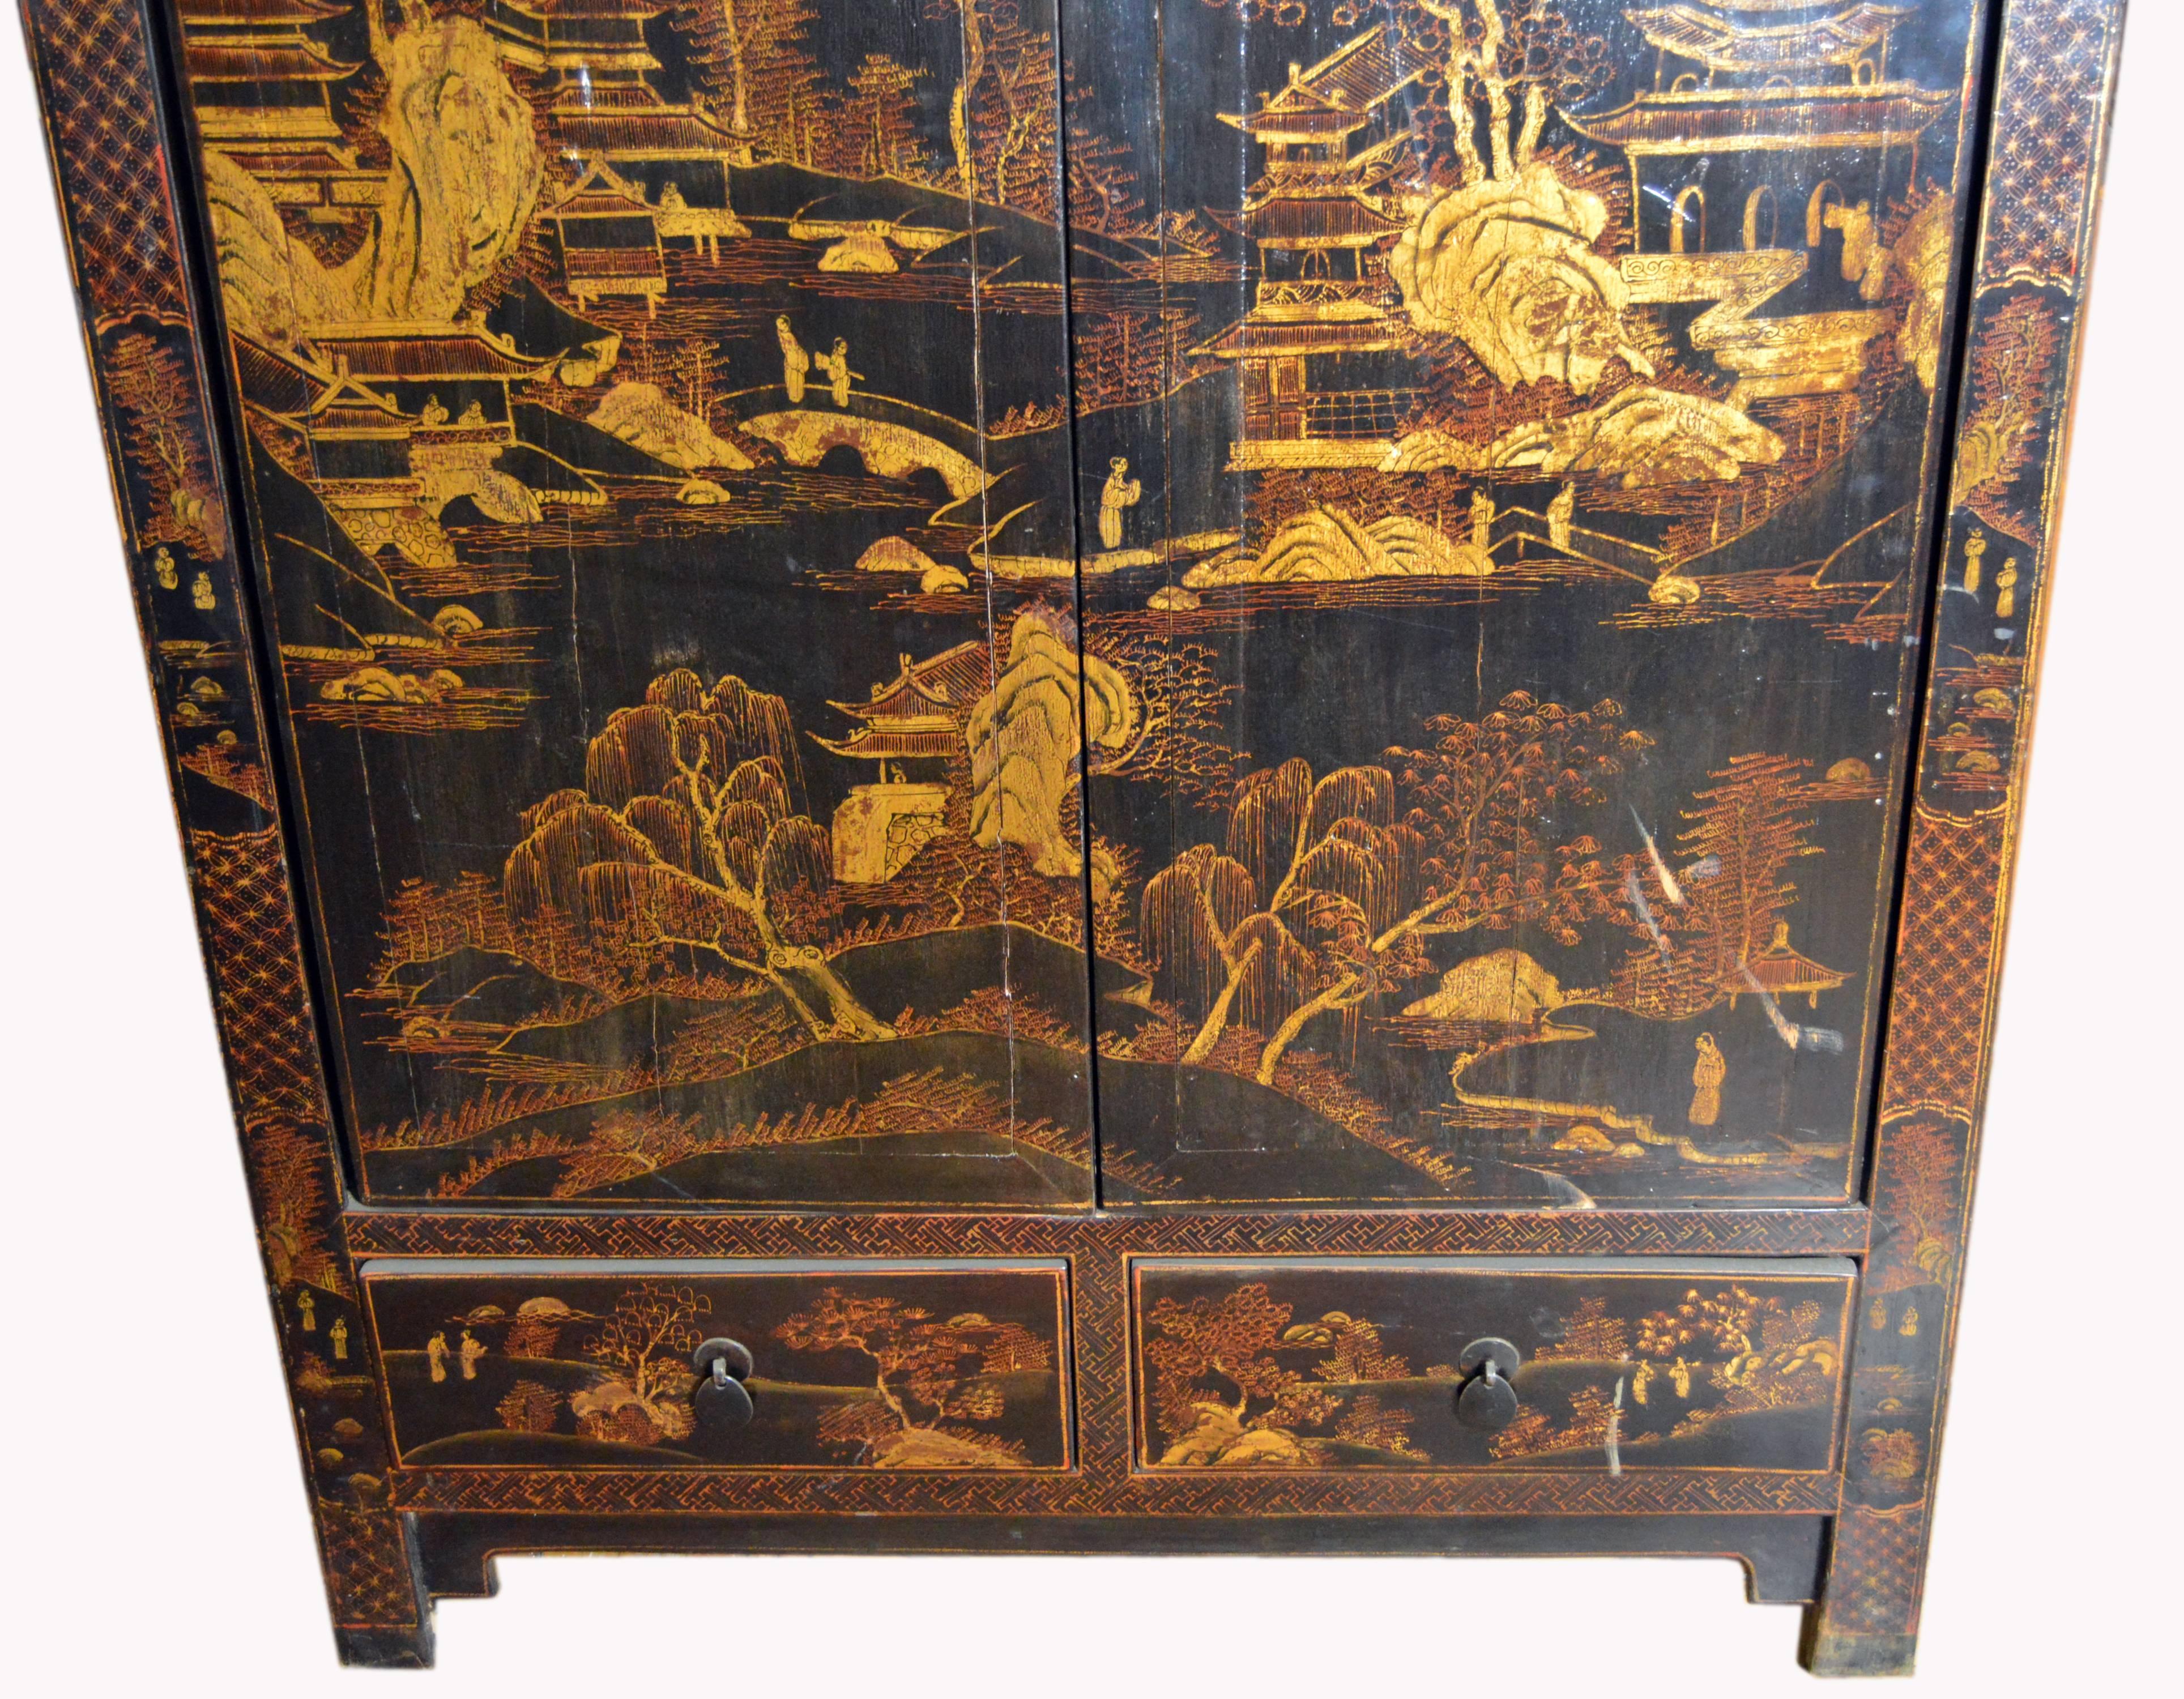 Wood Antique Black Lacquered Chinese Armoire with Hand-Painted Gilded Scenes